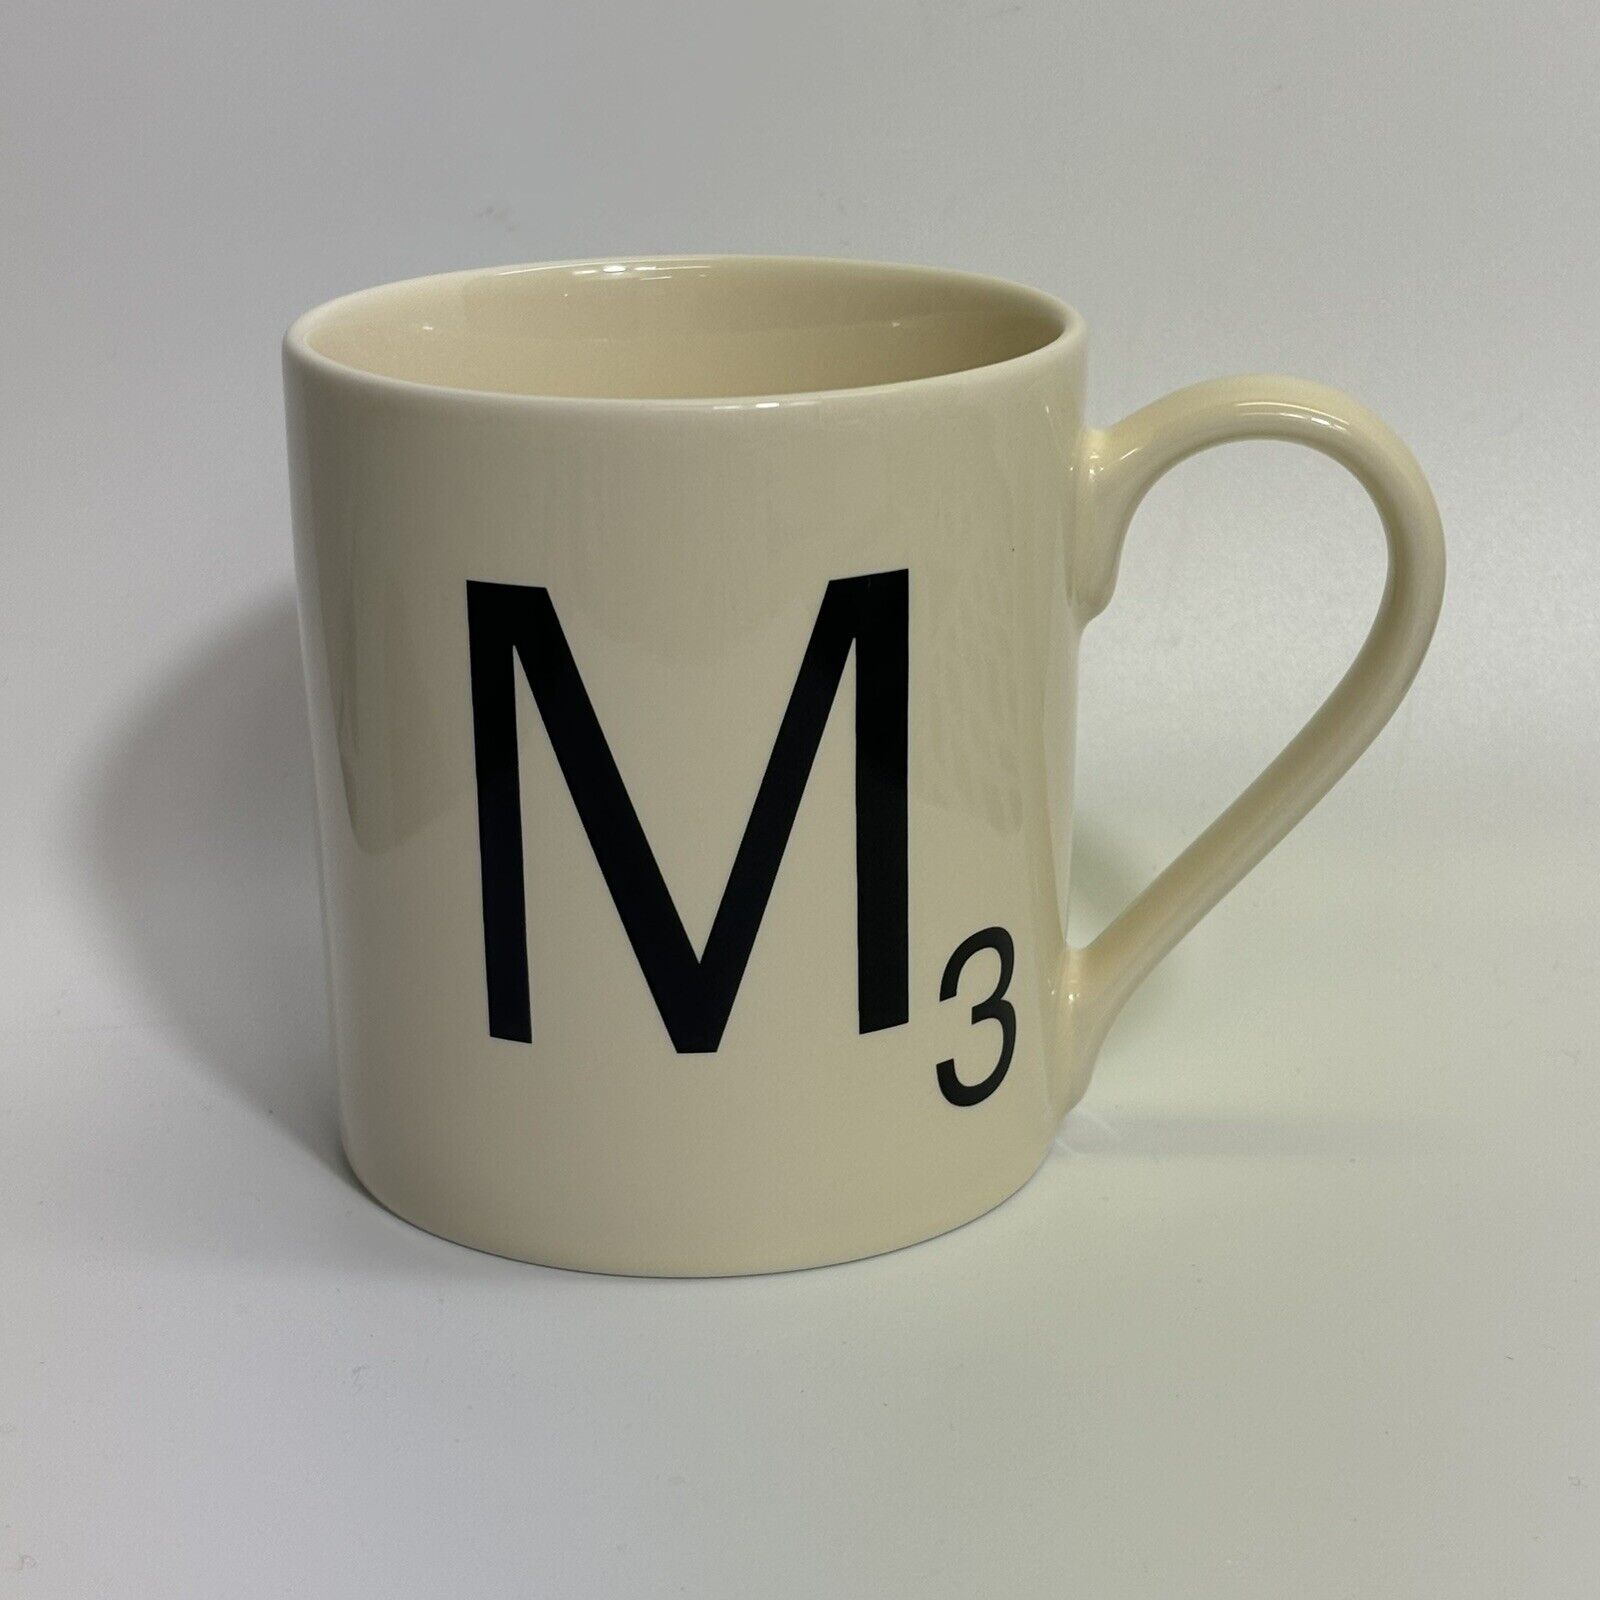 Scrabble Coffee Cup Mug ~ Ivory Letter M3 By: Wild and Wolf 2013 Batch #2572